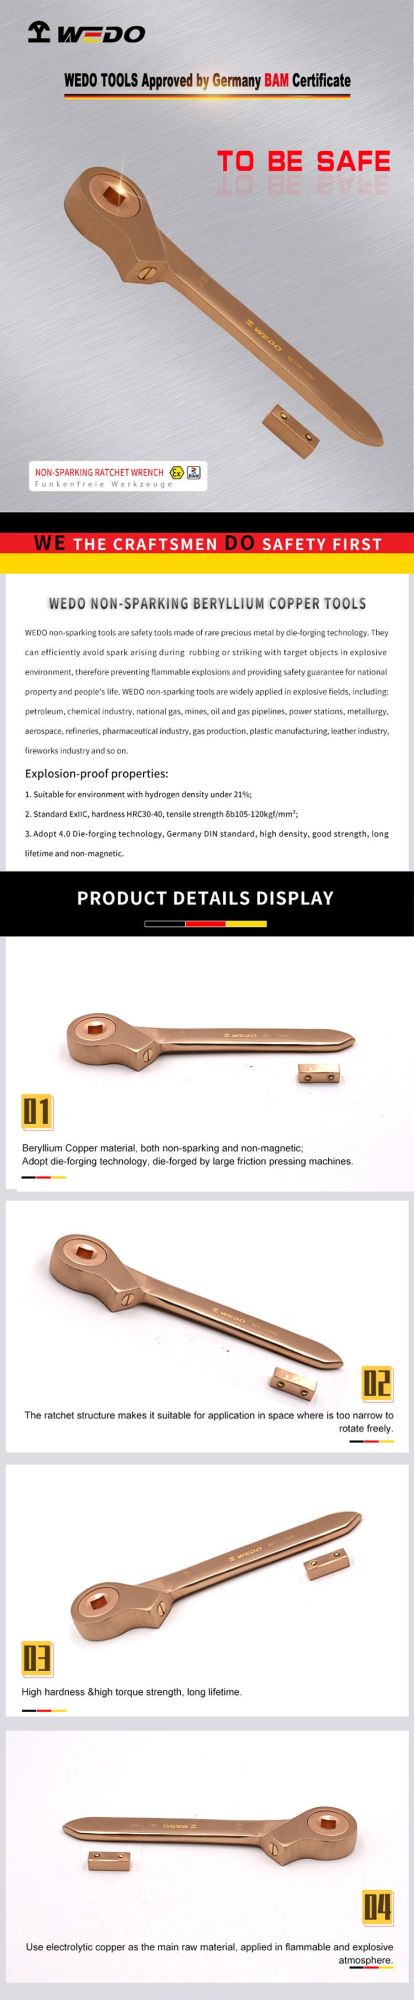 WEDO Beryllium Copper Non-Sparking Ratchet Wrench High Quality Spanner Bam/FM/GS Certified